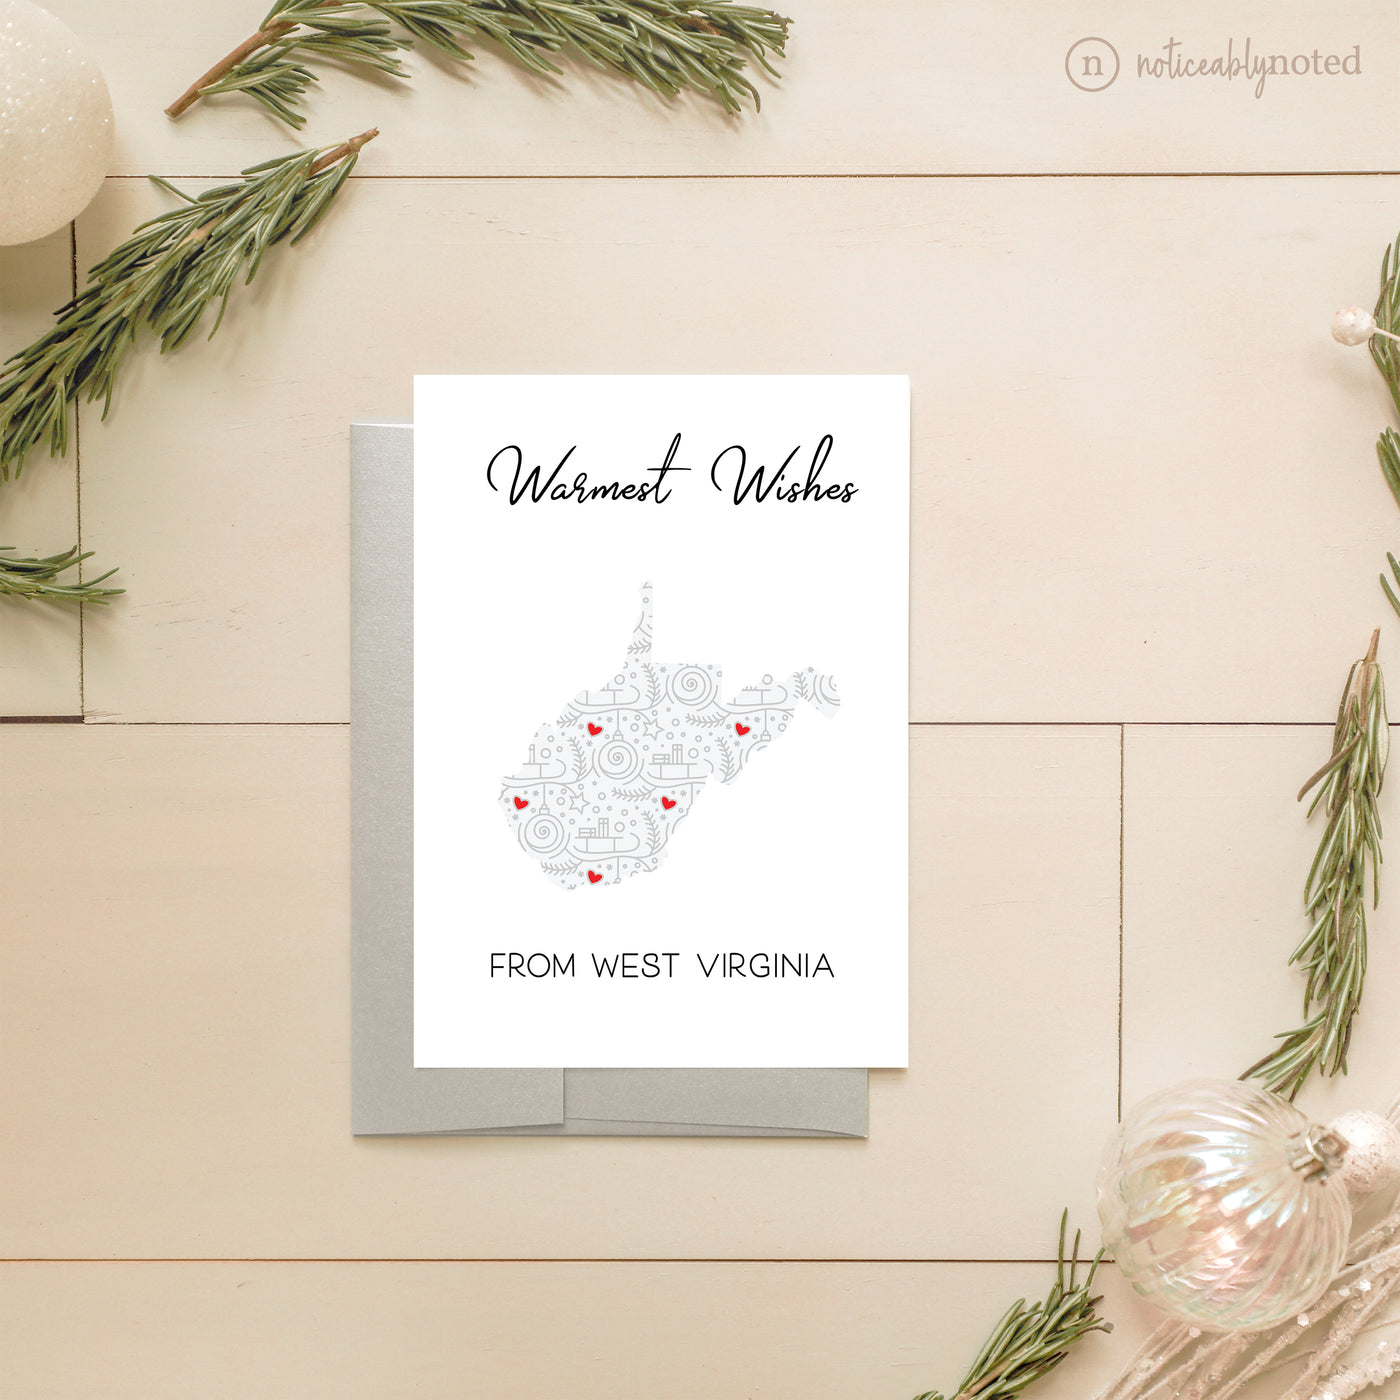 West Virginia Christmas Card - Warmest Wishes | Noticeably Noted